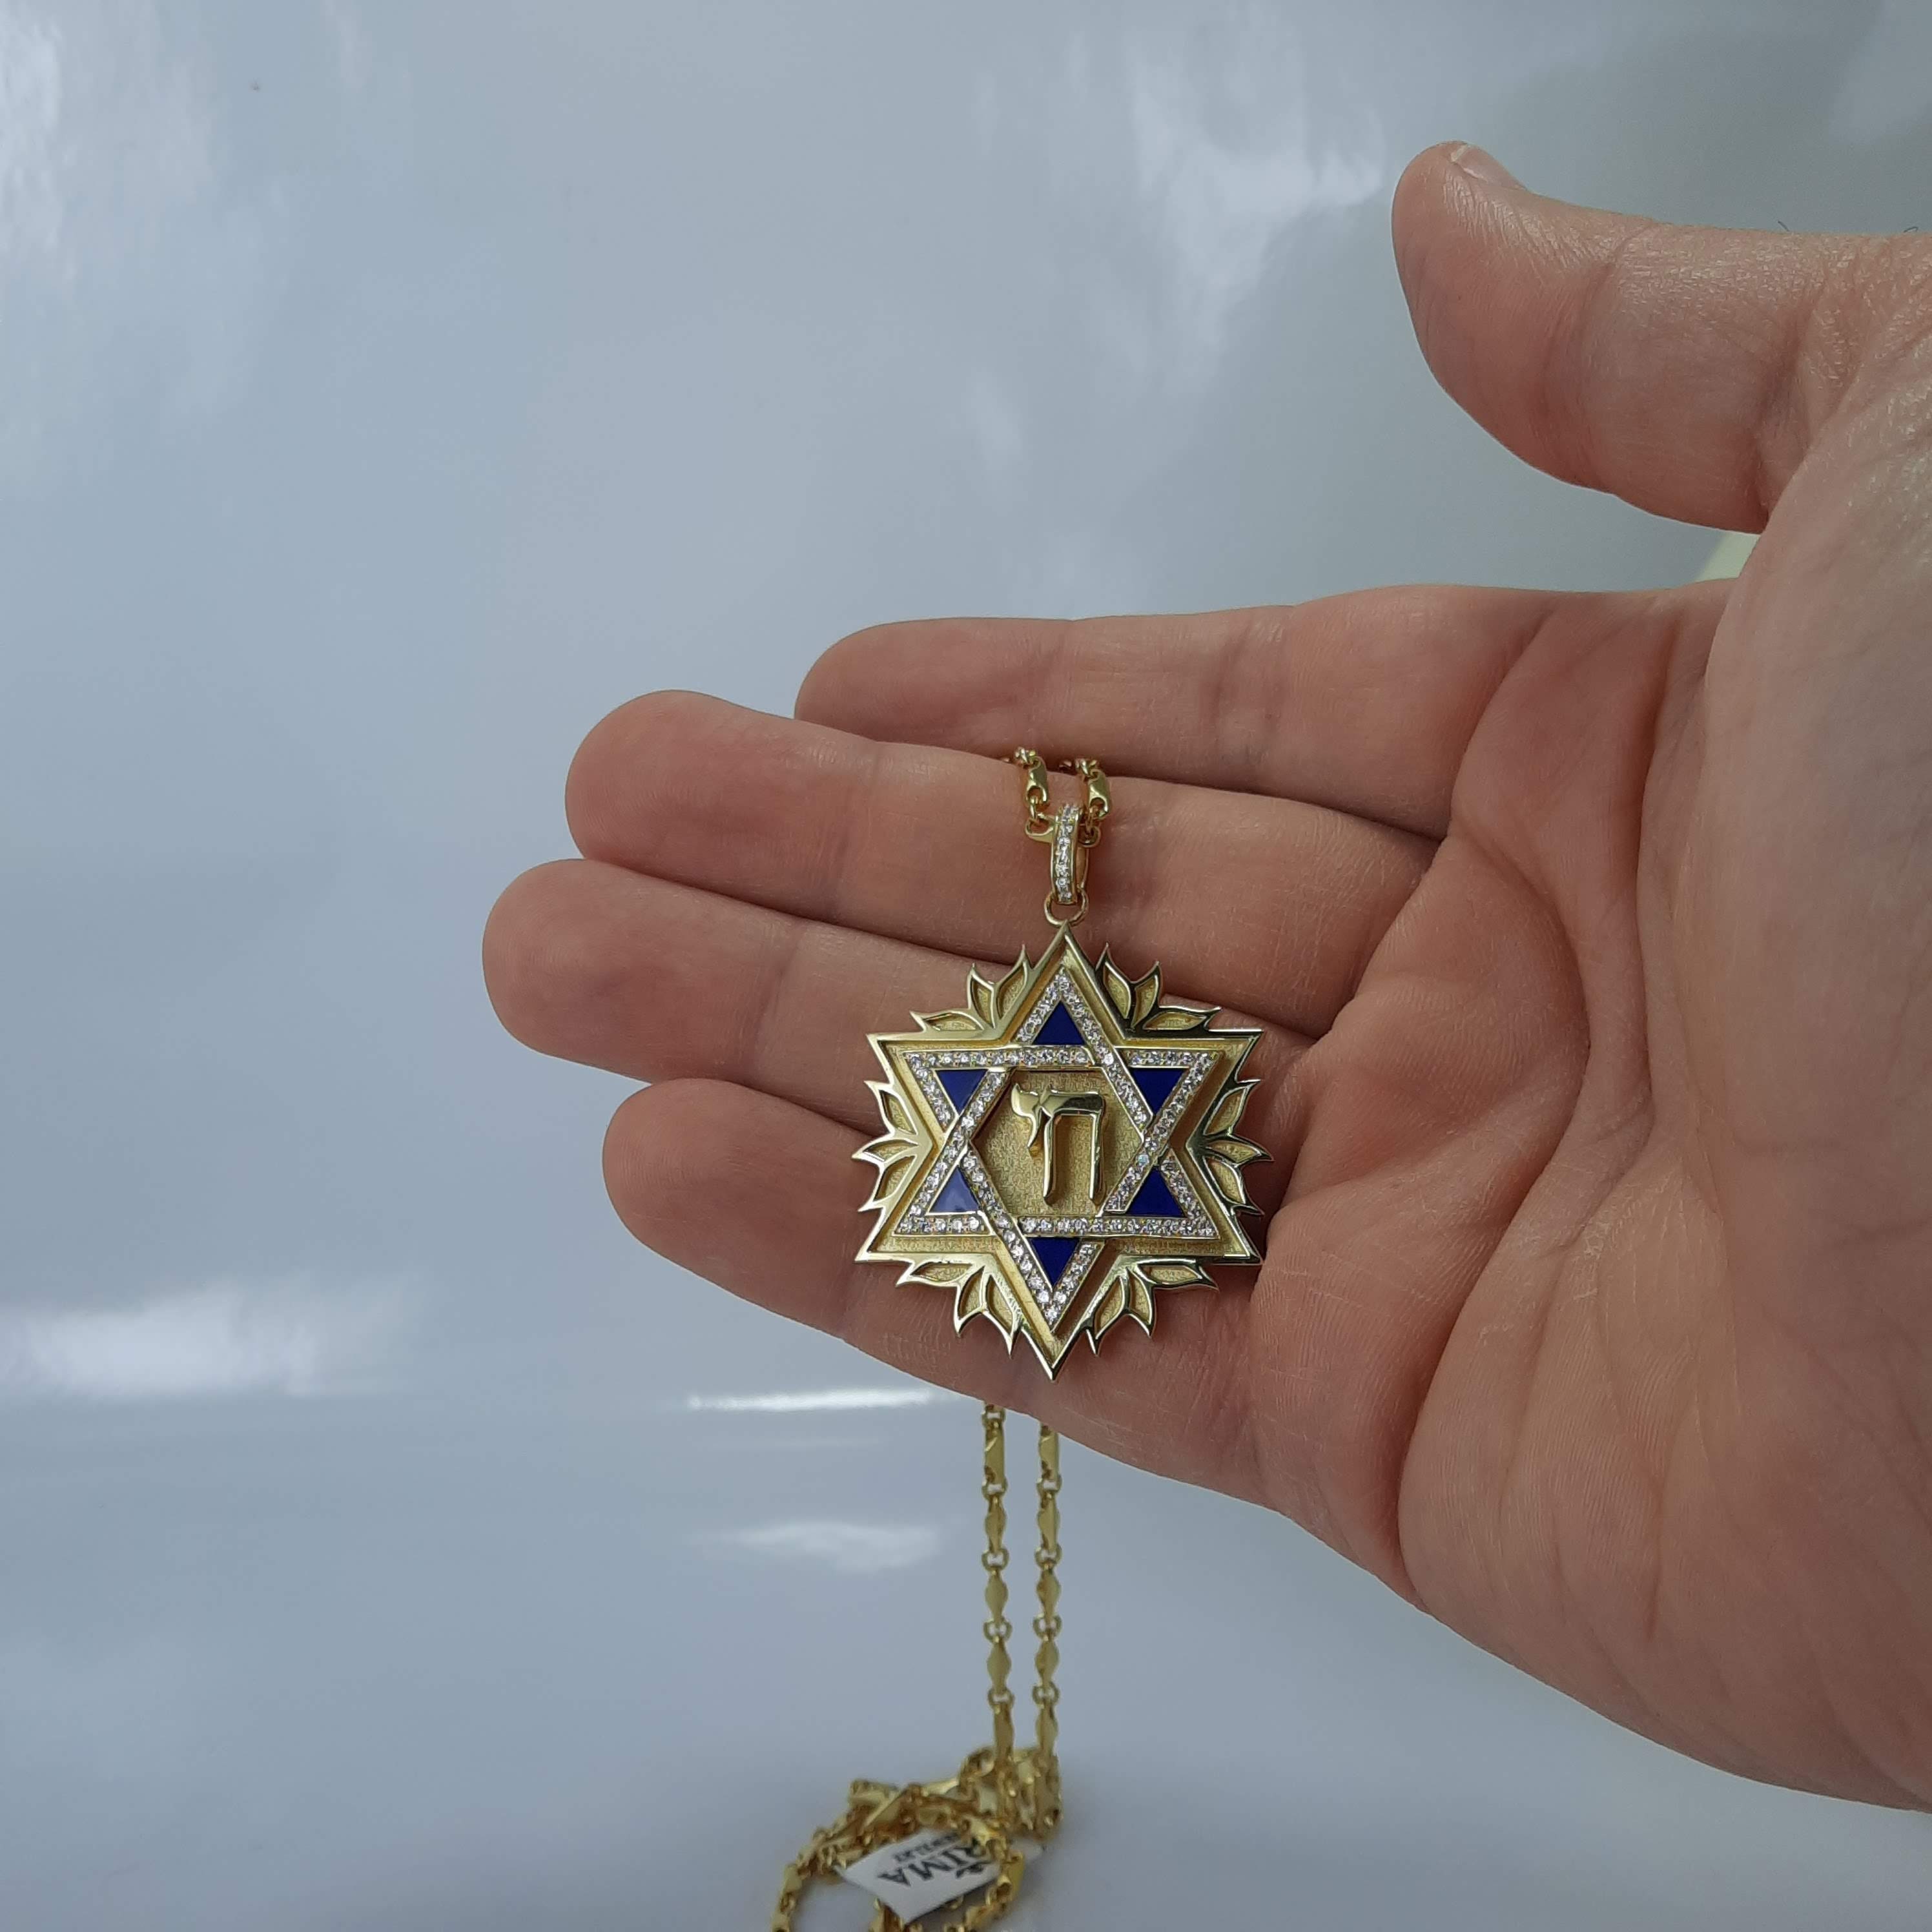 Buy 14k Gold Magen David Necklace, Jewish Star Necklace, Boho Gold Necklace,  Special Magen David, Judaica Jewelry, Textured Necklace Online in India -  Etsy